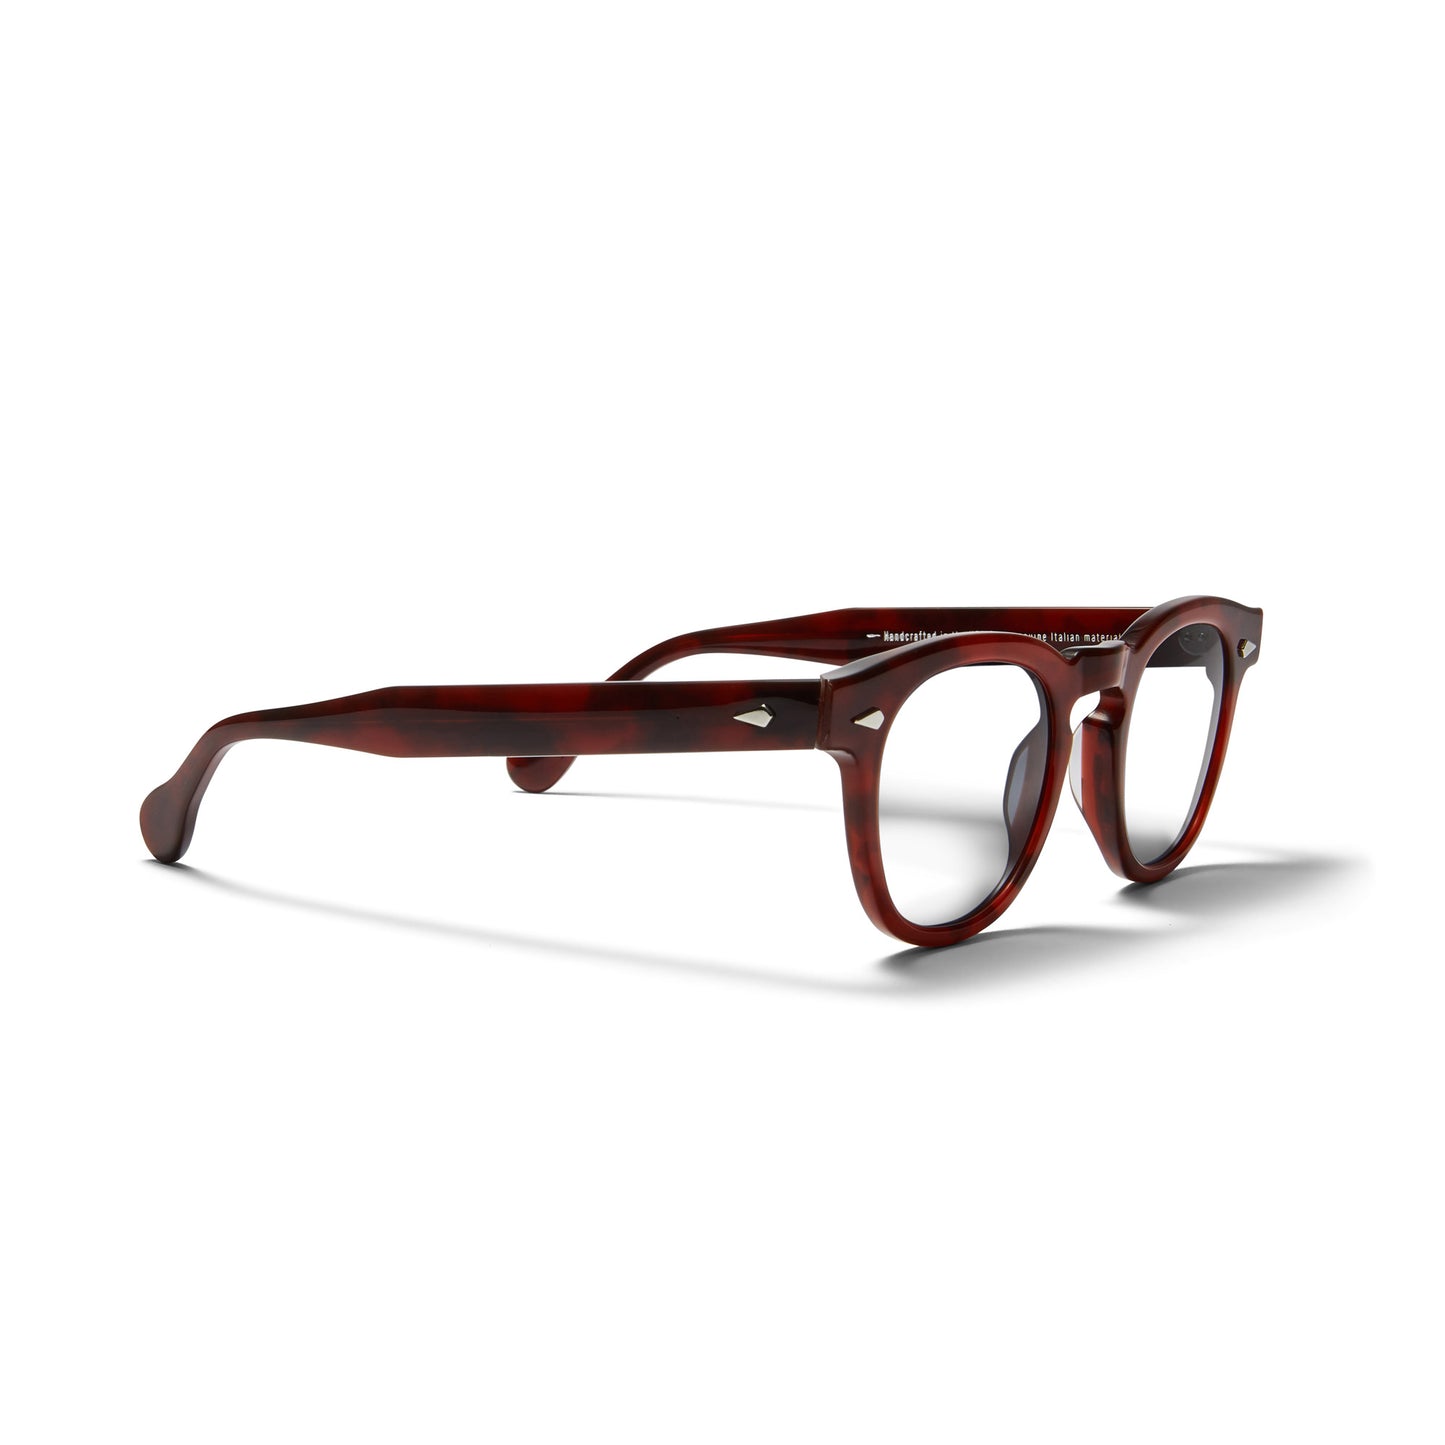 A side view of the burgundy Arnel USA frame—the Vintage eyewear. 